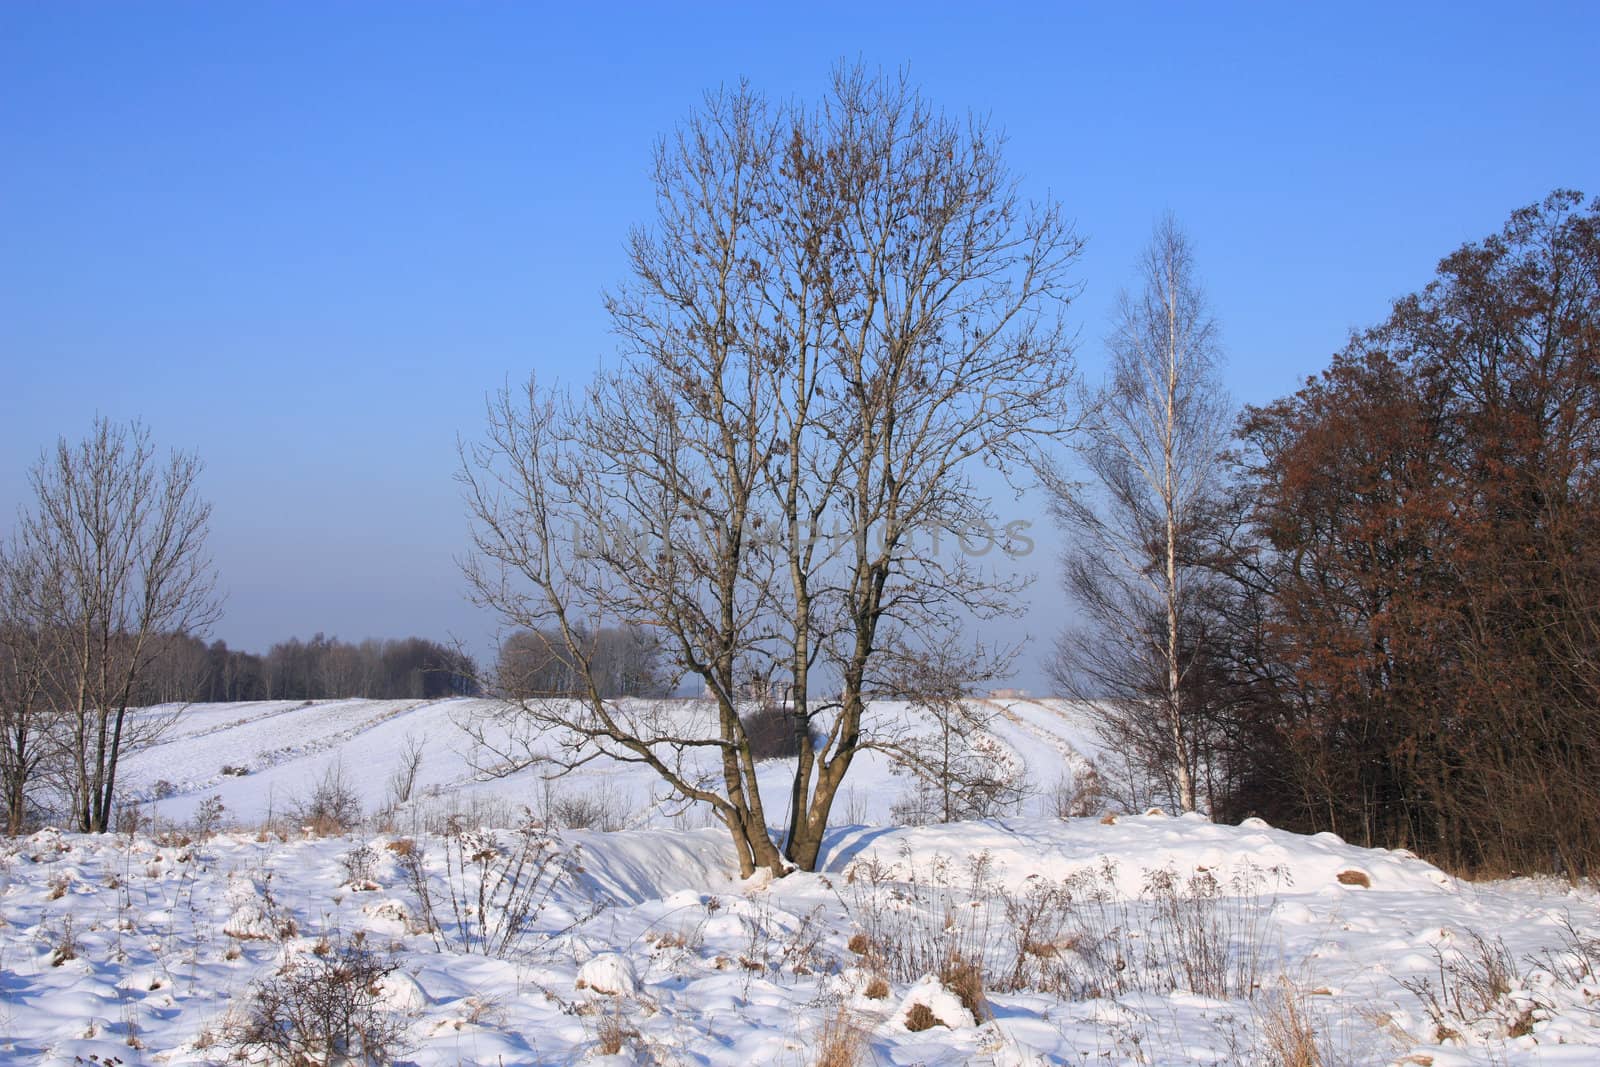 Winter in Poland. Snowy plains and forest trees. Upper Silesia region, Bytom area.